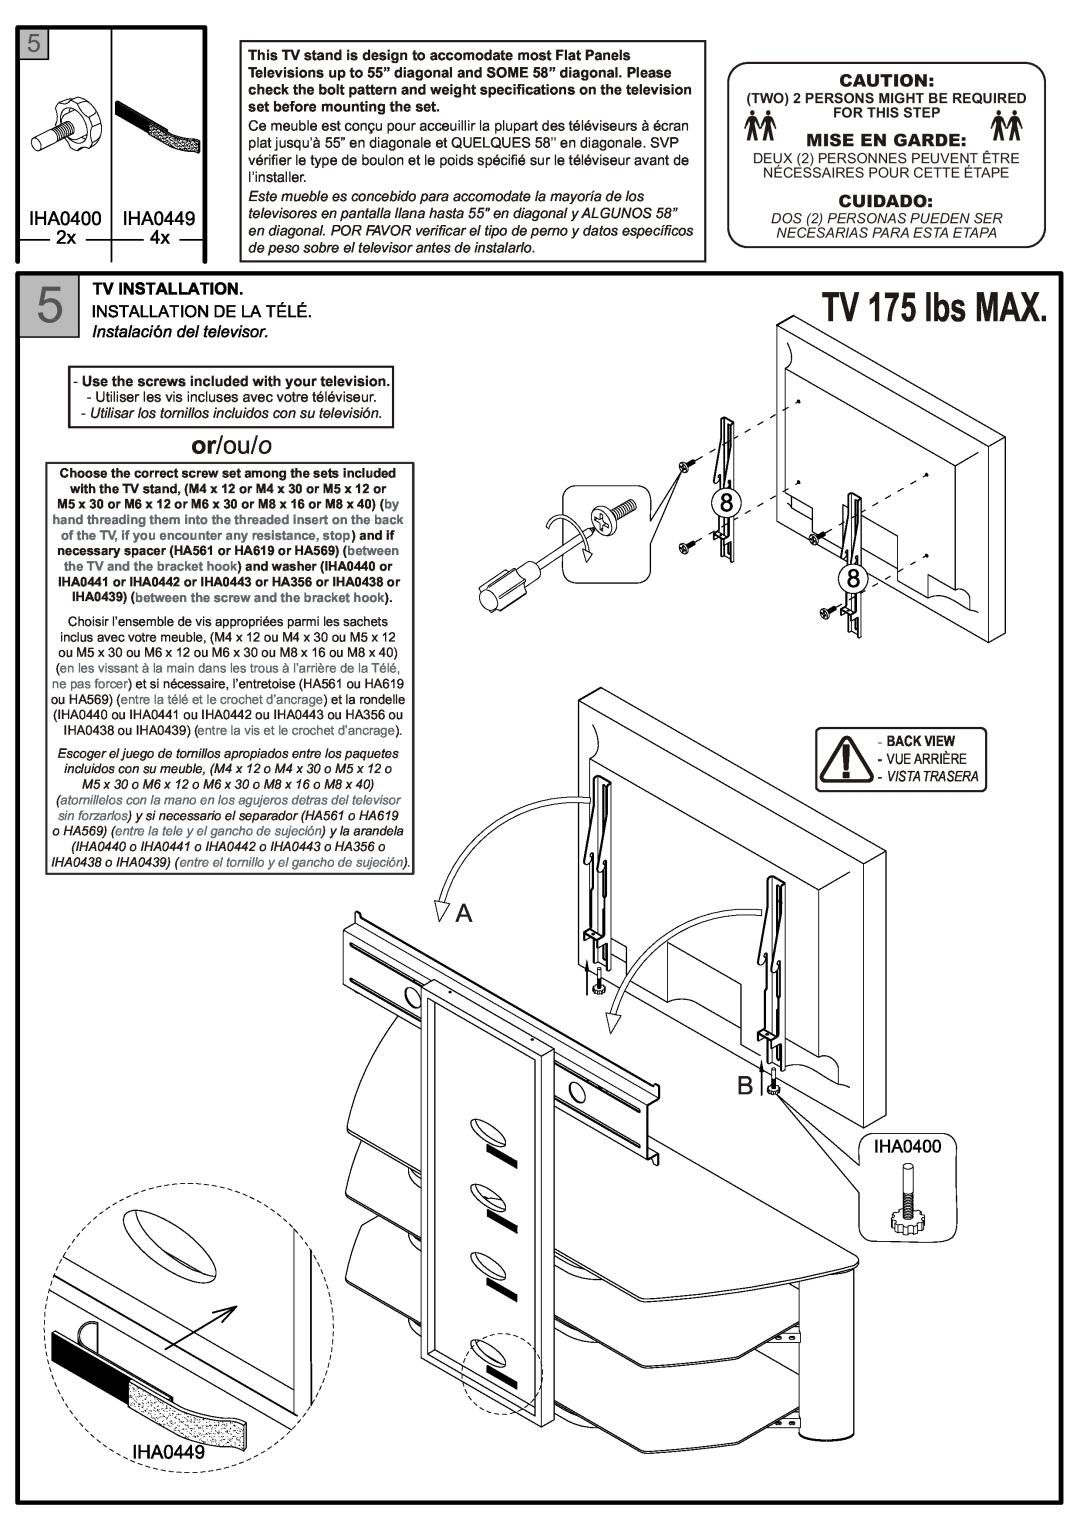 Tech Craft TRK55B or/ou/o, TV 175 lbs MAX, Mise En Garde, Cuidado, Use the screws included with your television, Back View 